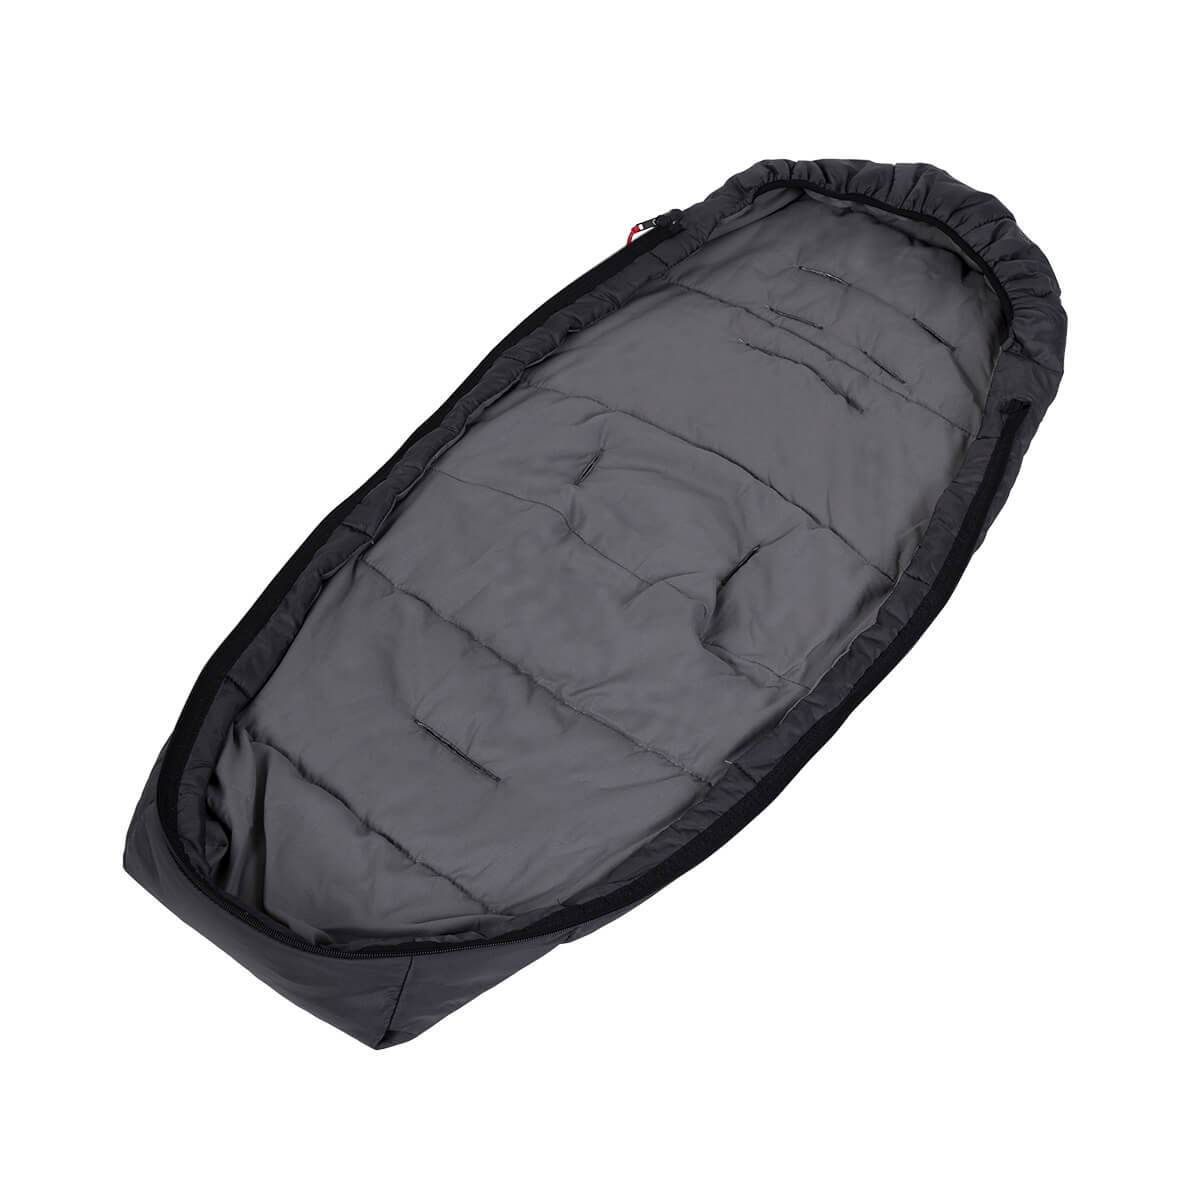 Phil and Ted Snuggle And Snooze Sleeping Bag - ANB Baby -$75 - $100